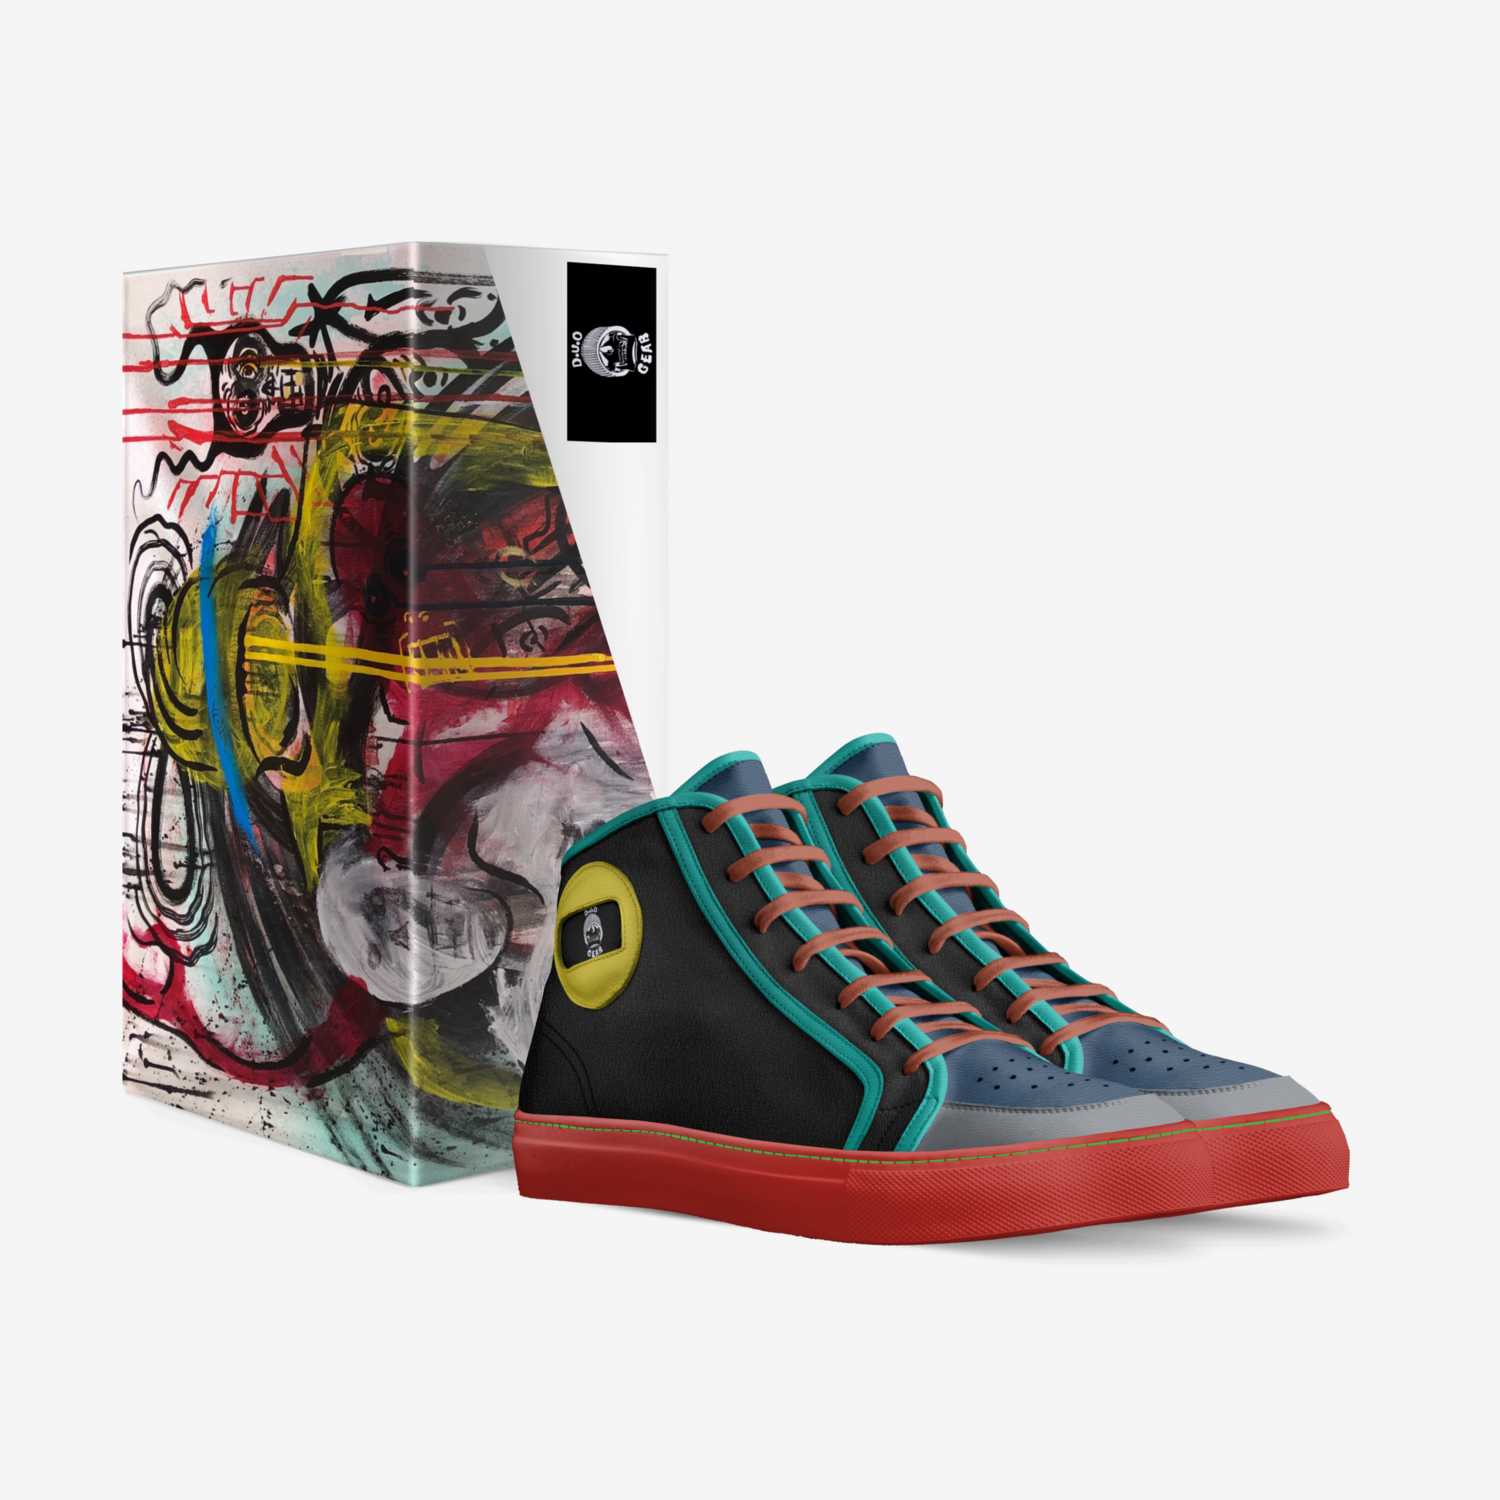 D.U.O GEAR custom made in Italy shoes by Irrix Screen | Box view